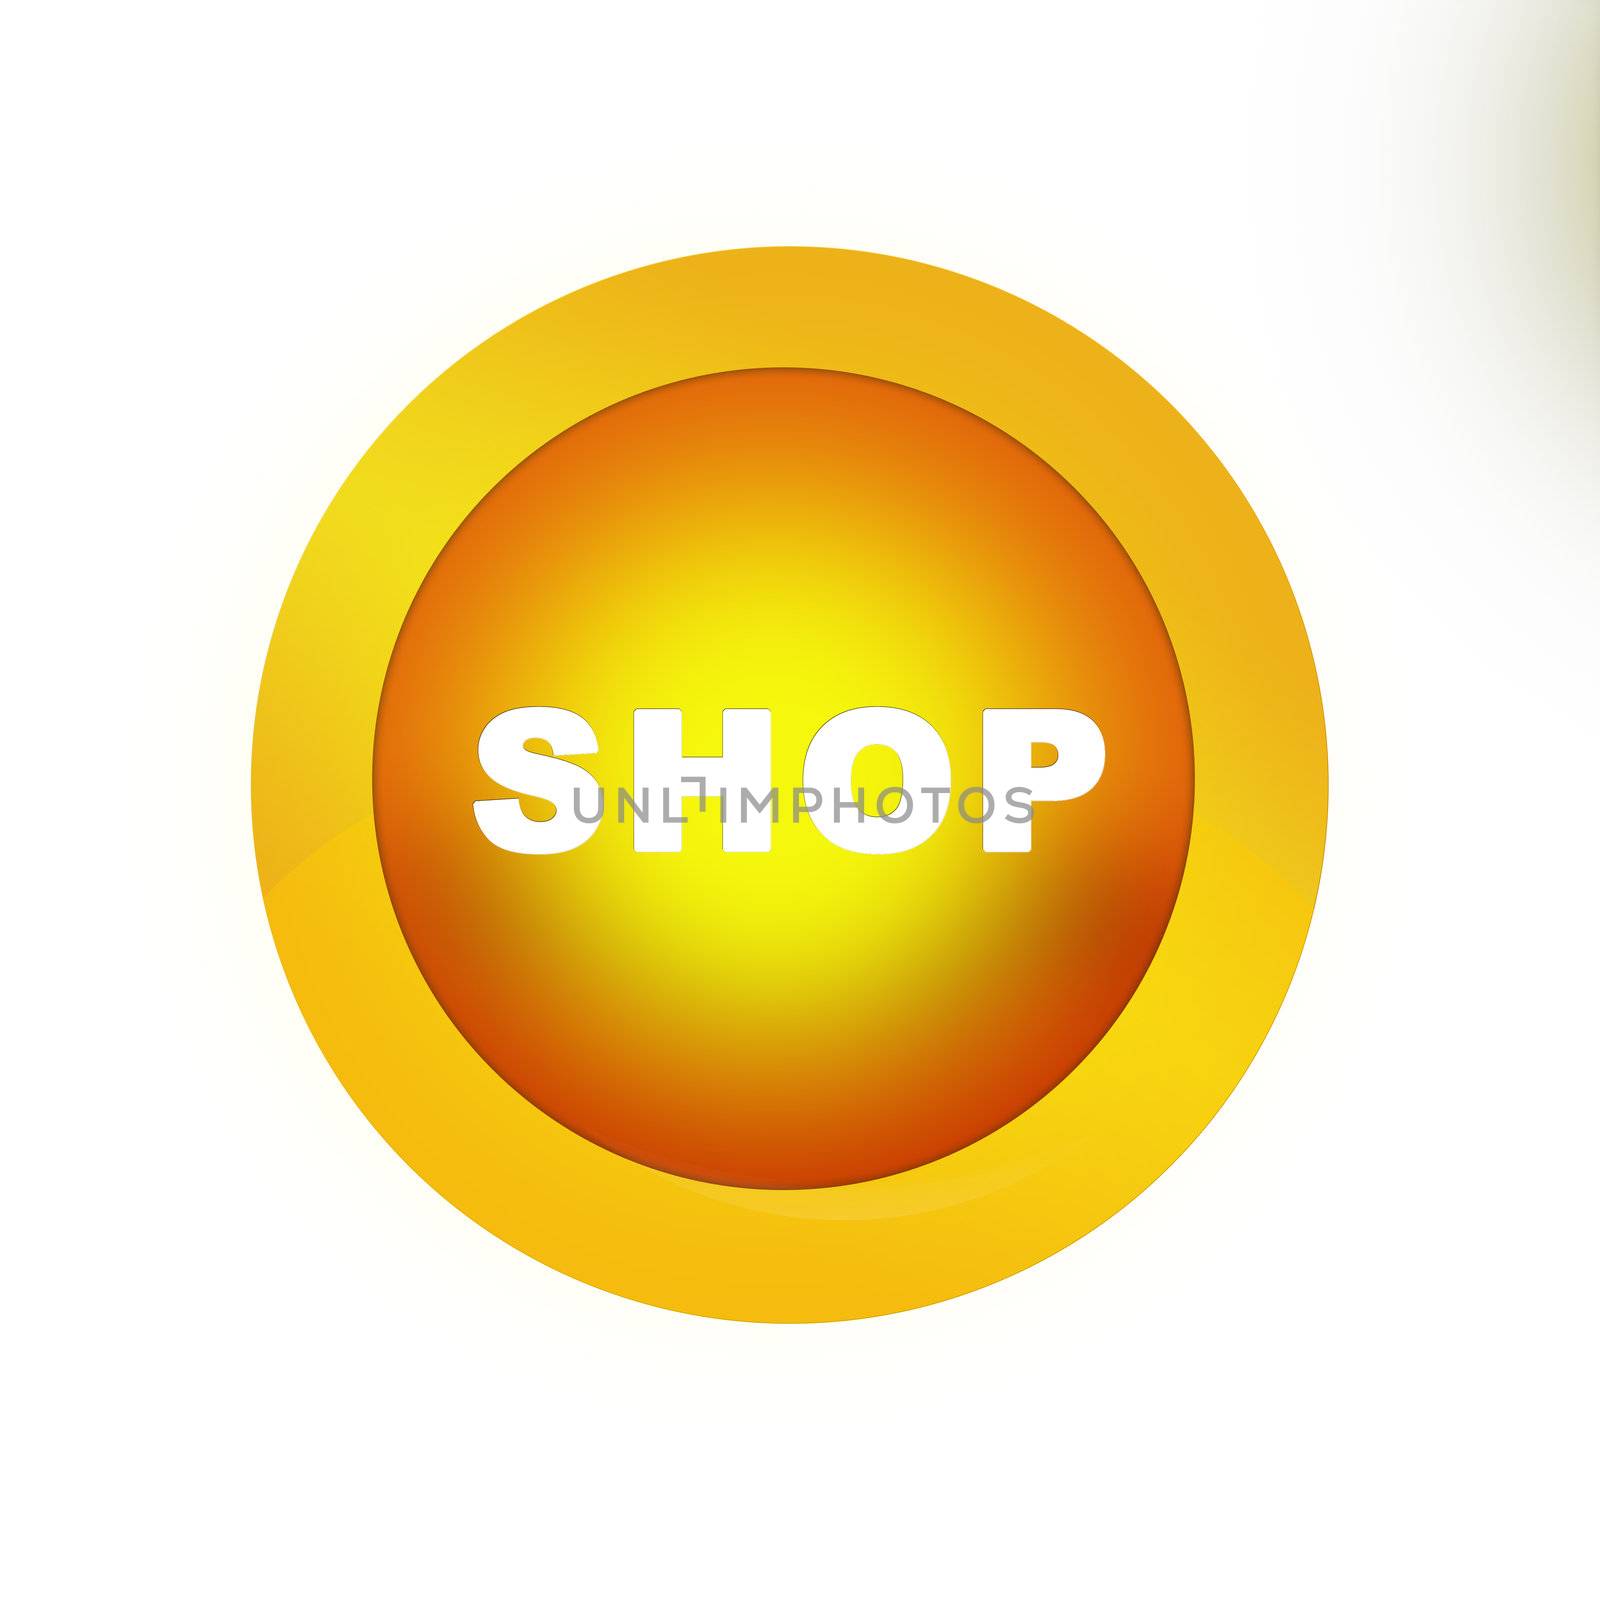 Shop, button icon for the web page- you can put text or symbol into it.